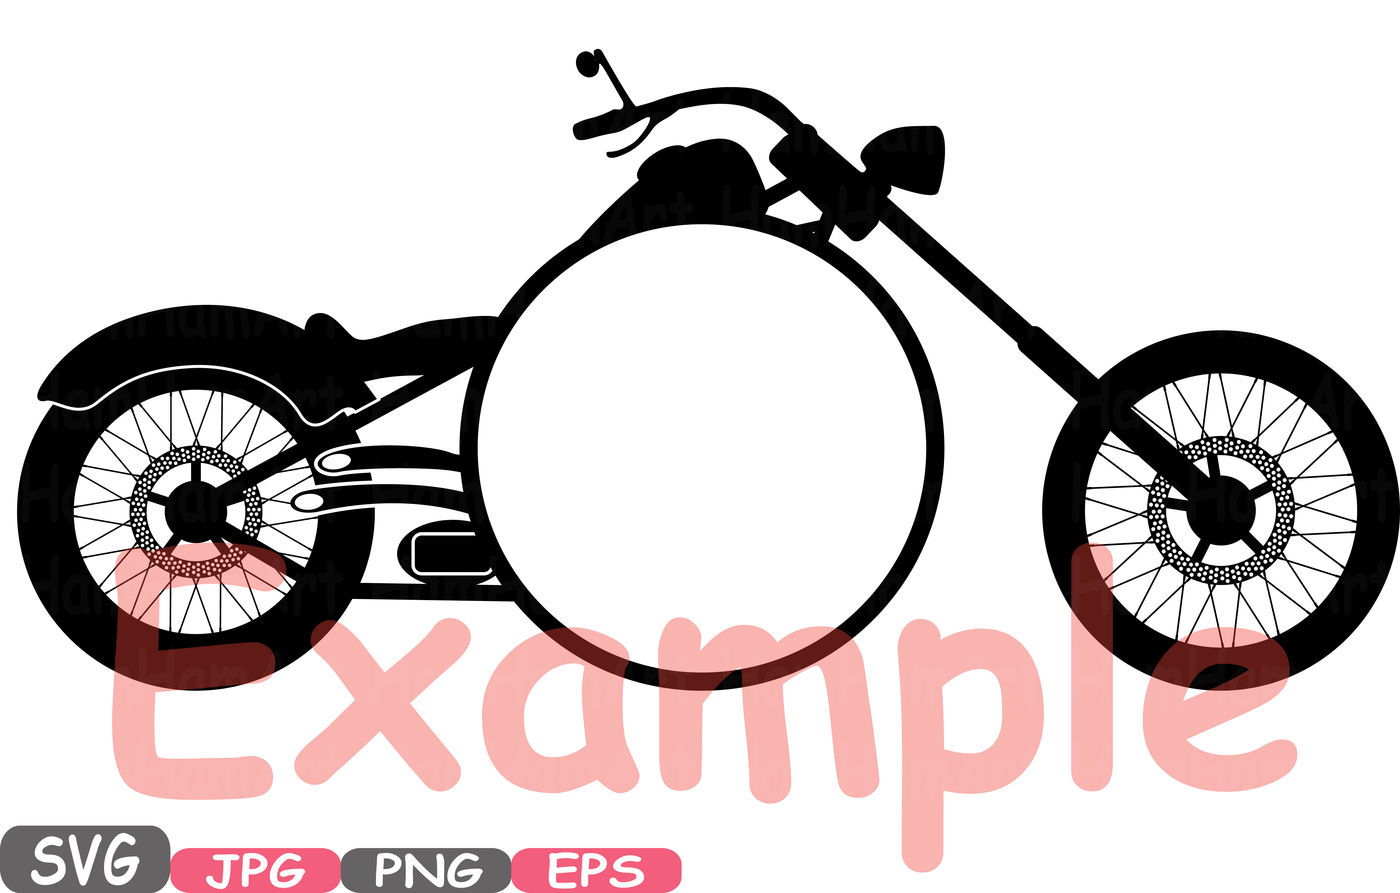 Choppers Split Circle Monogram Motorbike Cutting Files Svg Motorcycle Silhouette Motorcycle Clipart Decal Frames Bunting Digital 621s By Hamhamart Thehungryjpeg Com